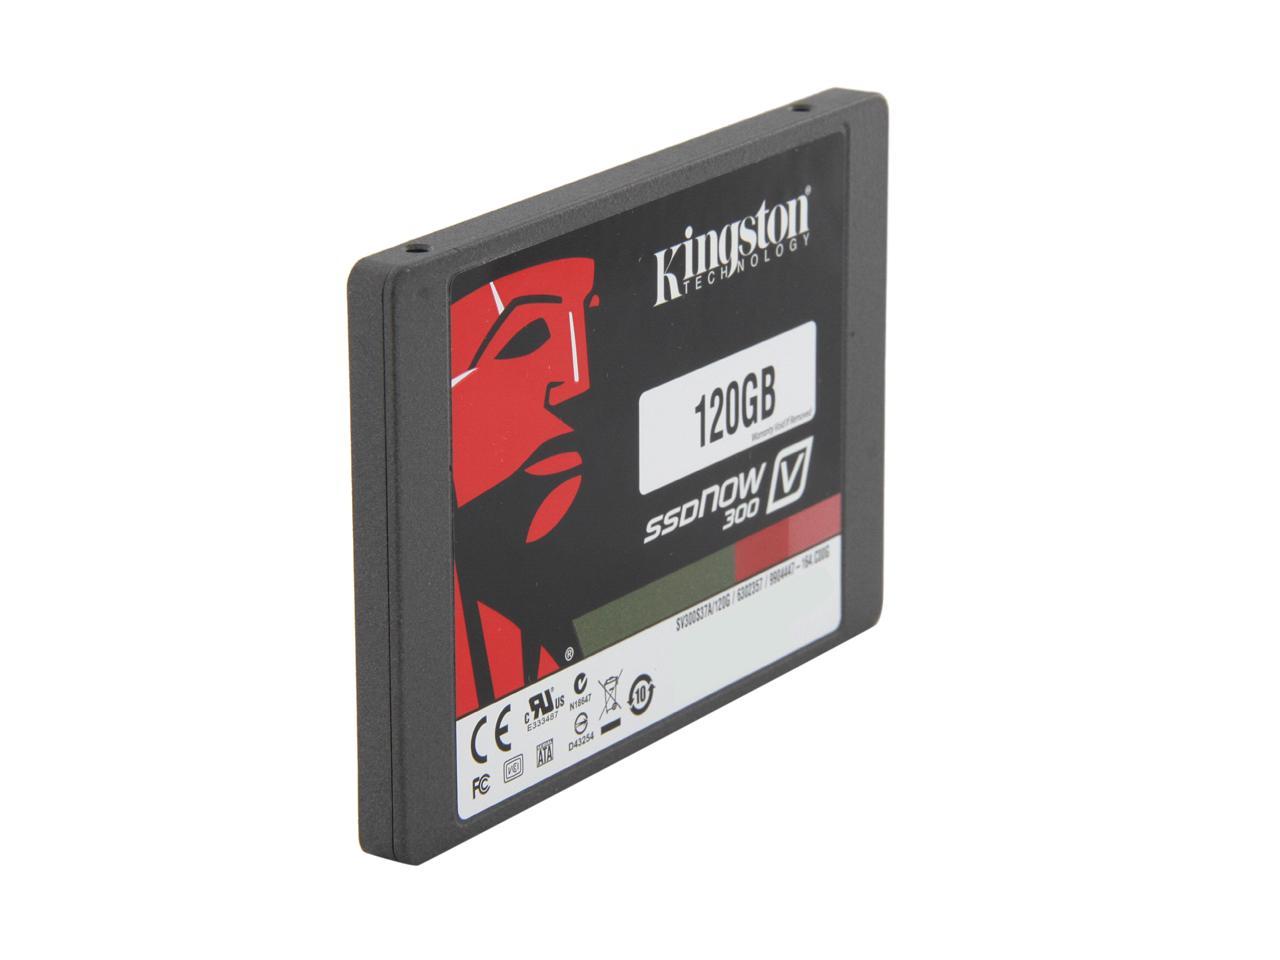 New V300 SSD For Kingston 120GB 2.5" Internal Solid State Drive SV300S37A/120G 